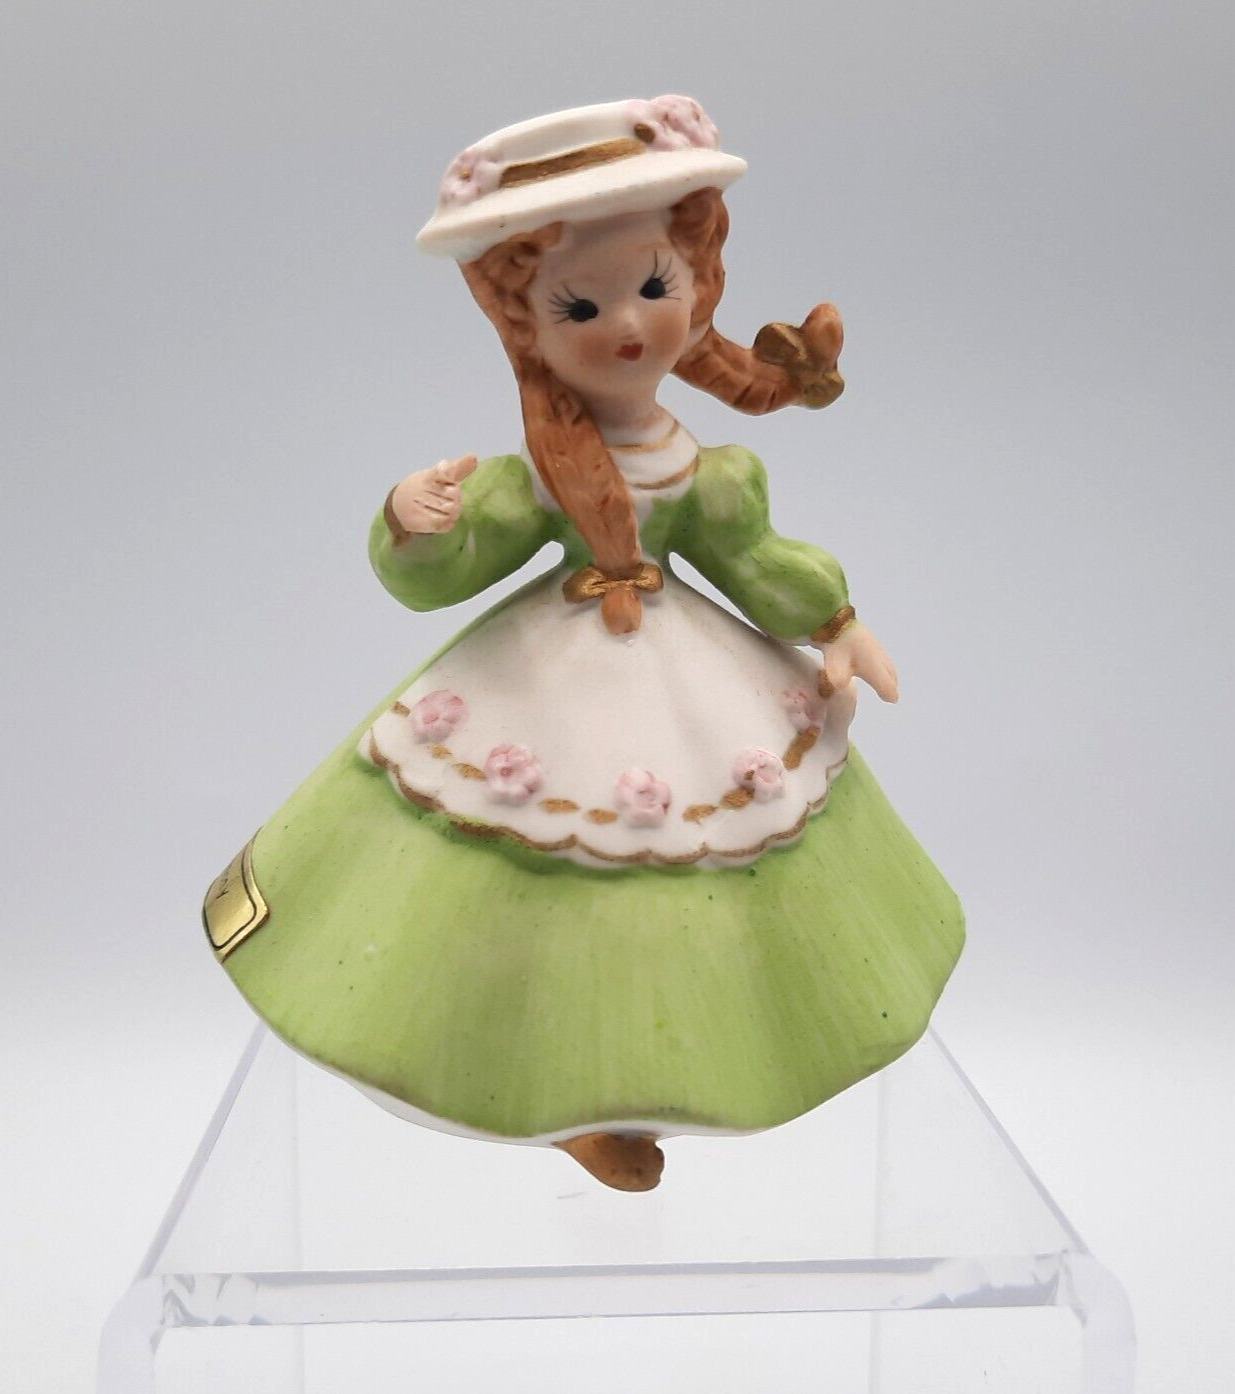 Southern Belle Green Gown & Braids Vintage 4 Inch Figurine Gold Label Germany